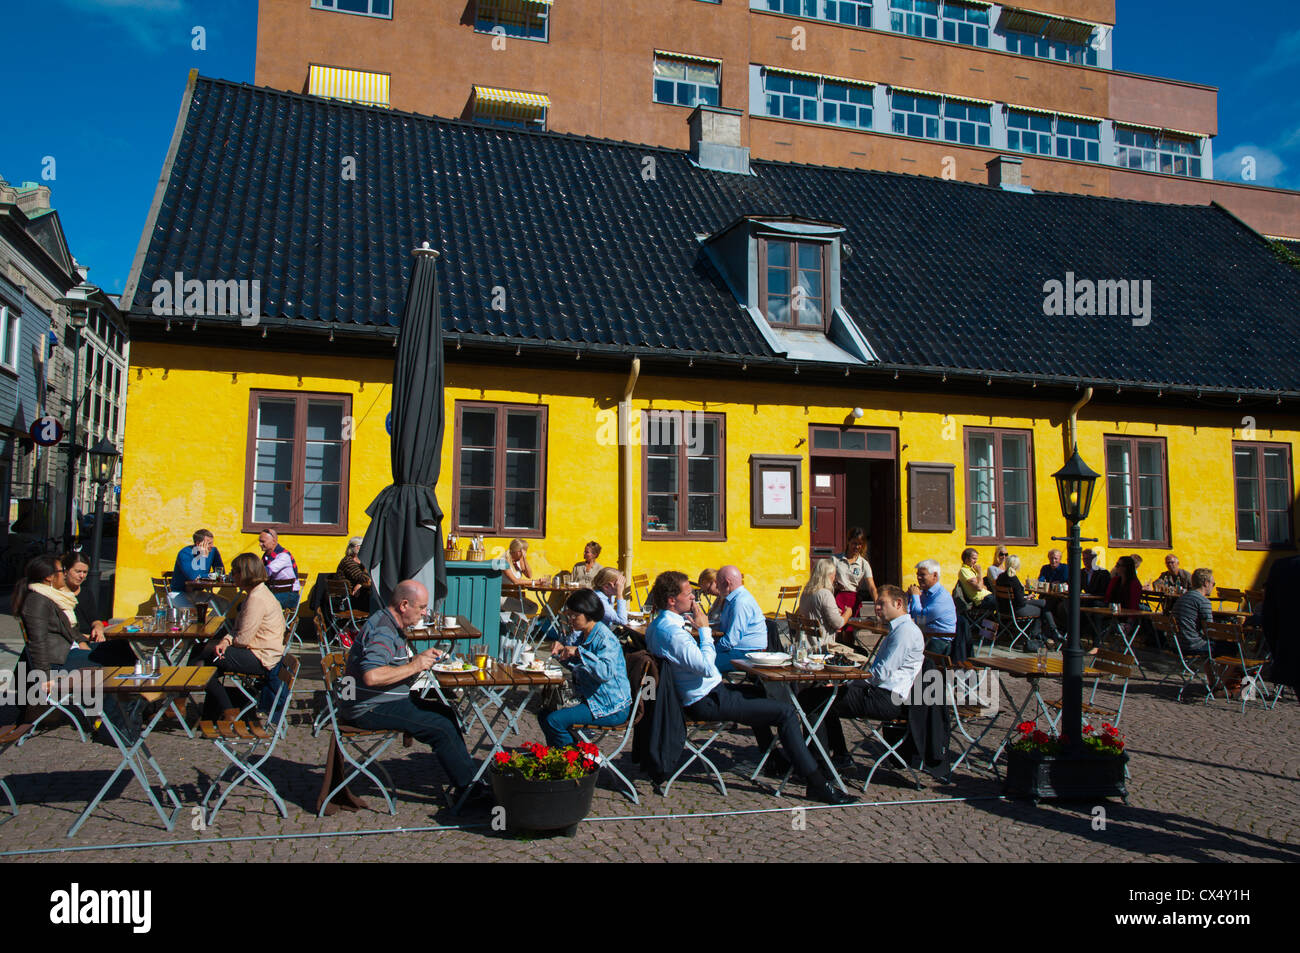 Restaurant terrace during lunch hour Christiania Torv square Kvadraturen district old town Oslo Norway Europe Stock Photo